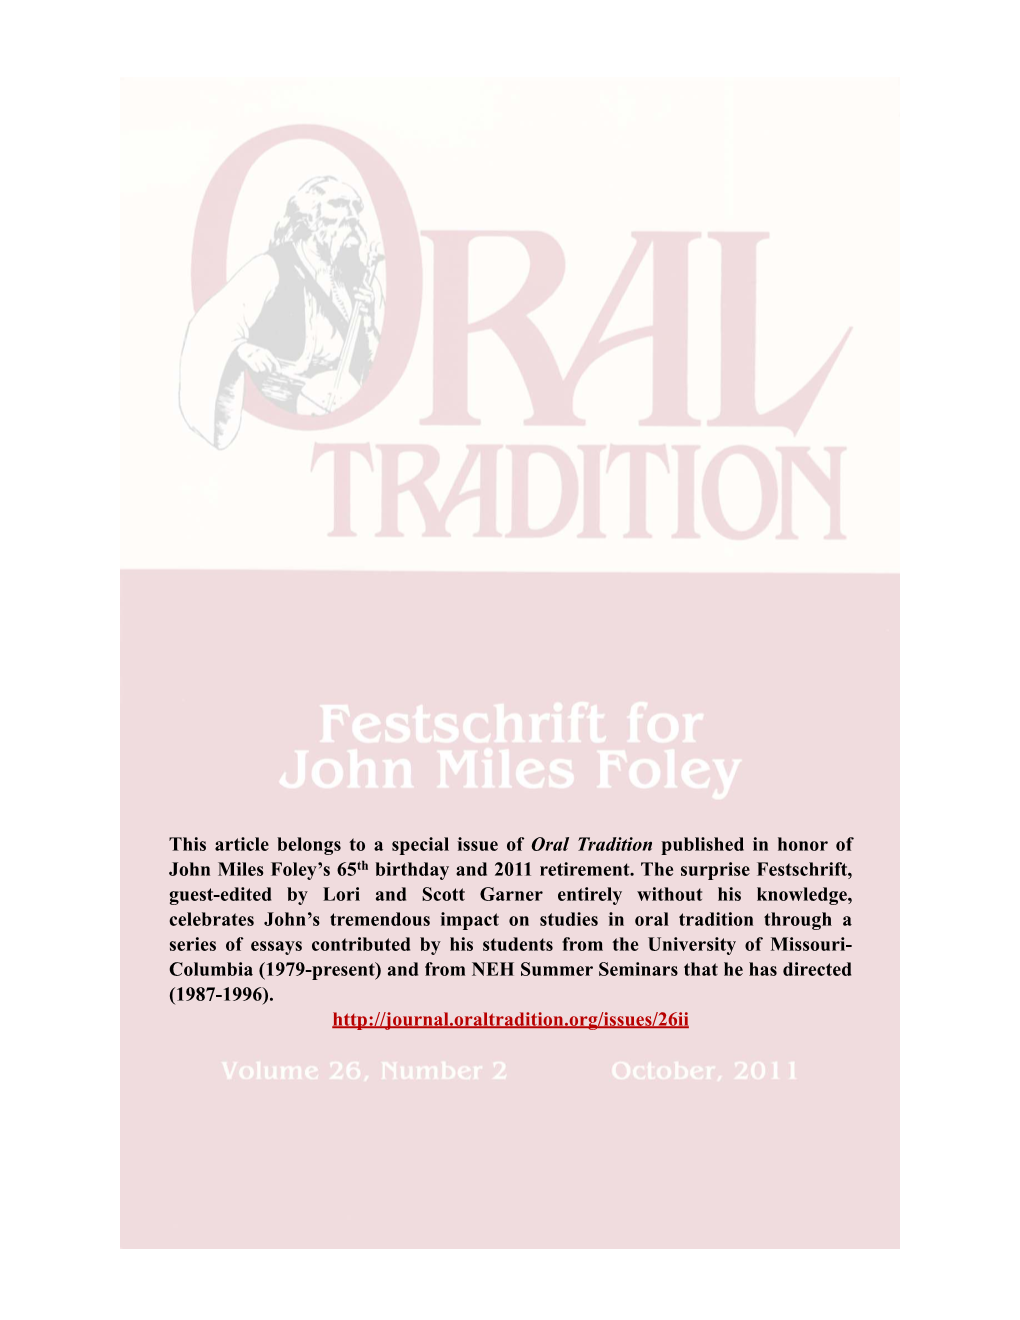 Annotated Bibliography of Works by John Miles Foley